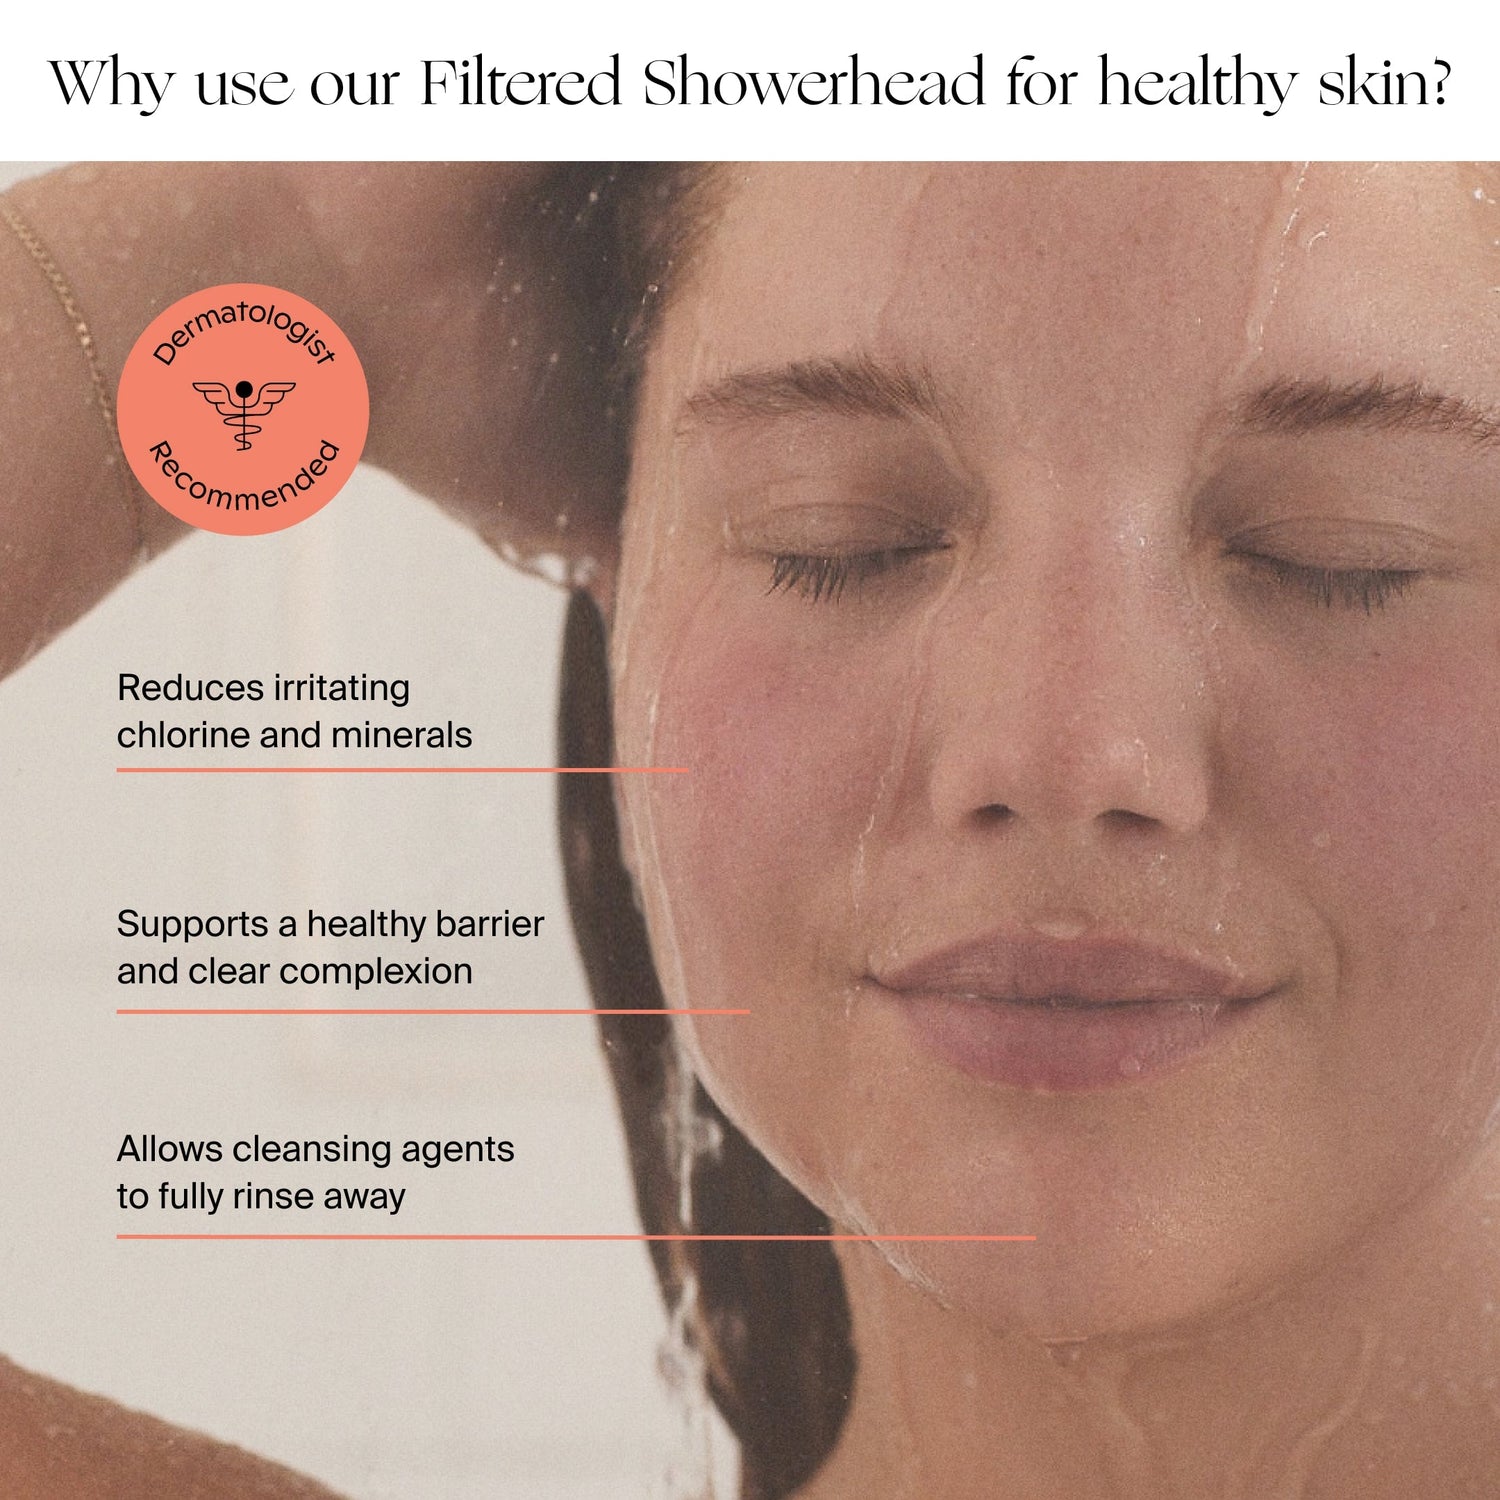 Filtered Showerhead Bundle | Lifestyle, Why use our Filtered Showerhead for healthy skin?